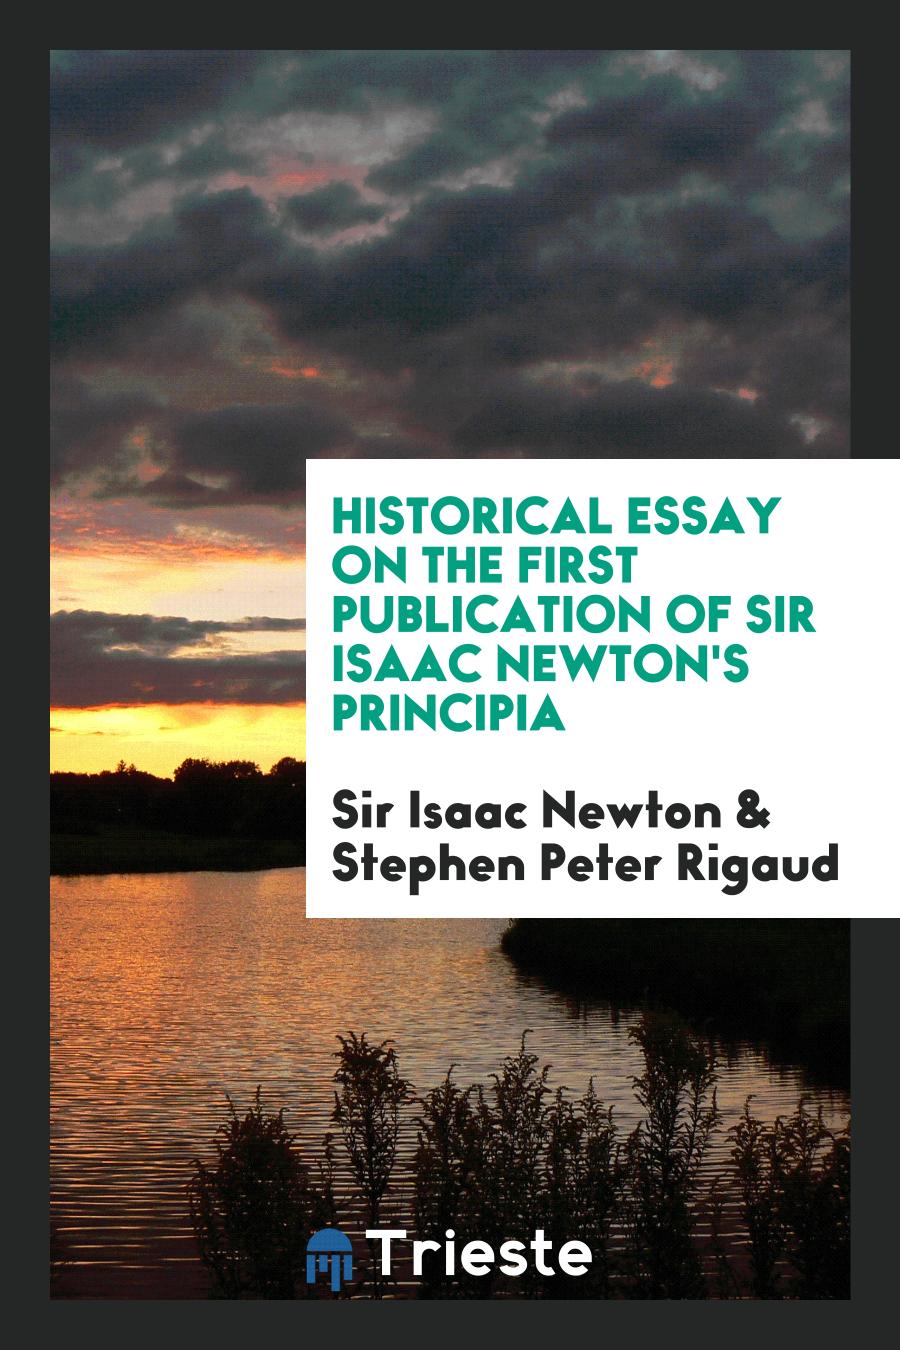 Historical Essay on the First Publication of Sir Isaac Newton's Principia